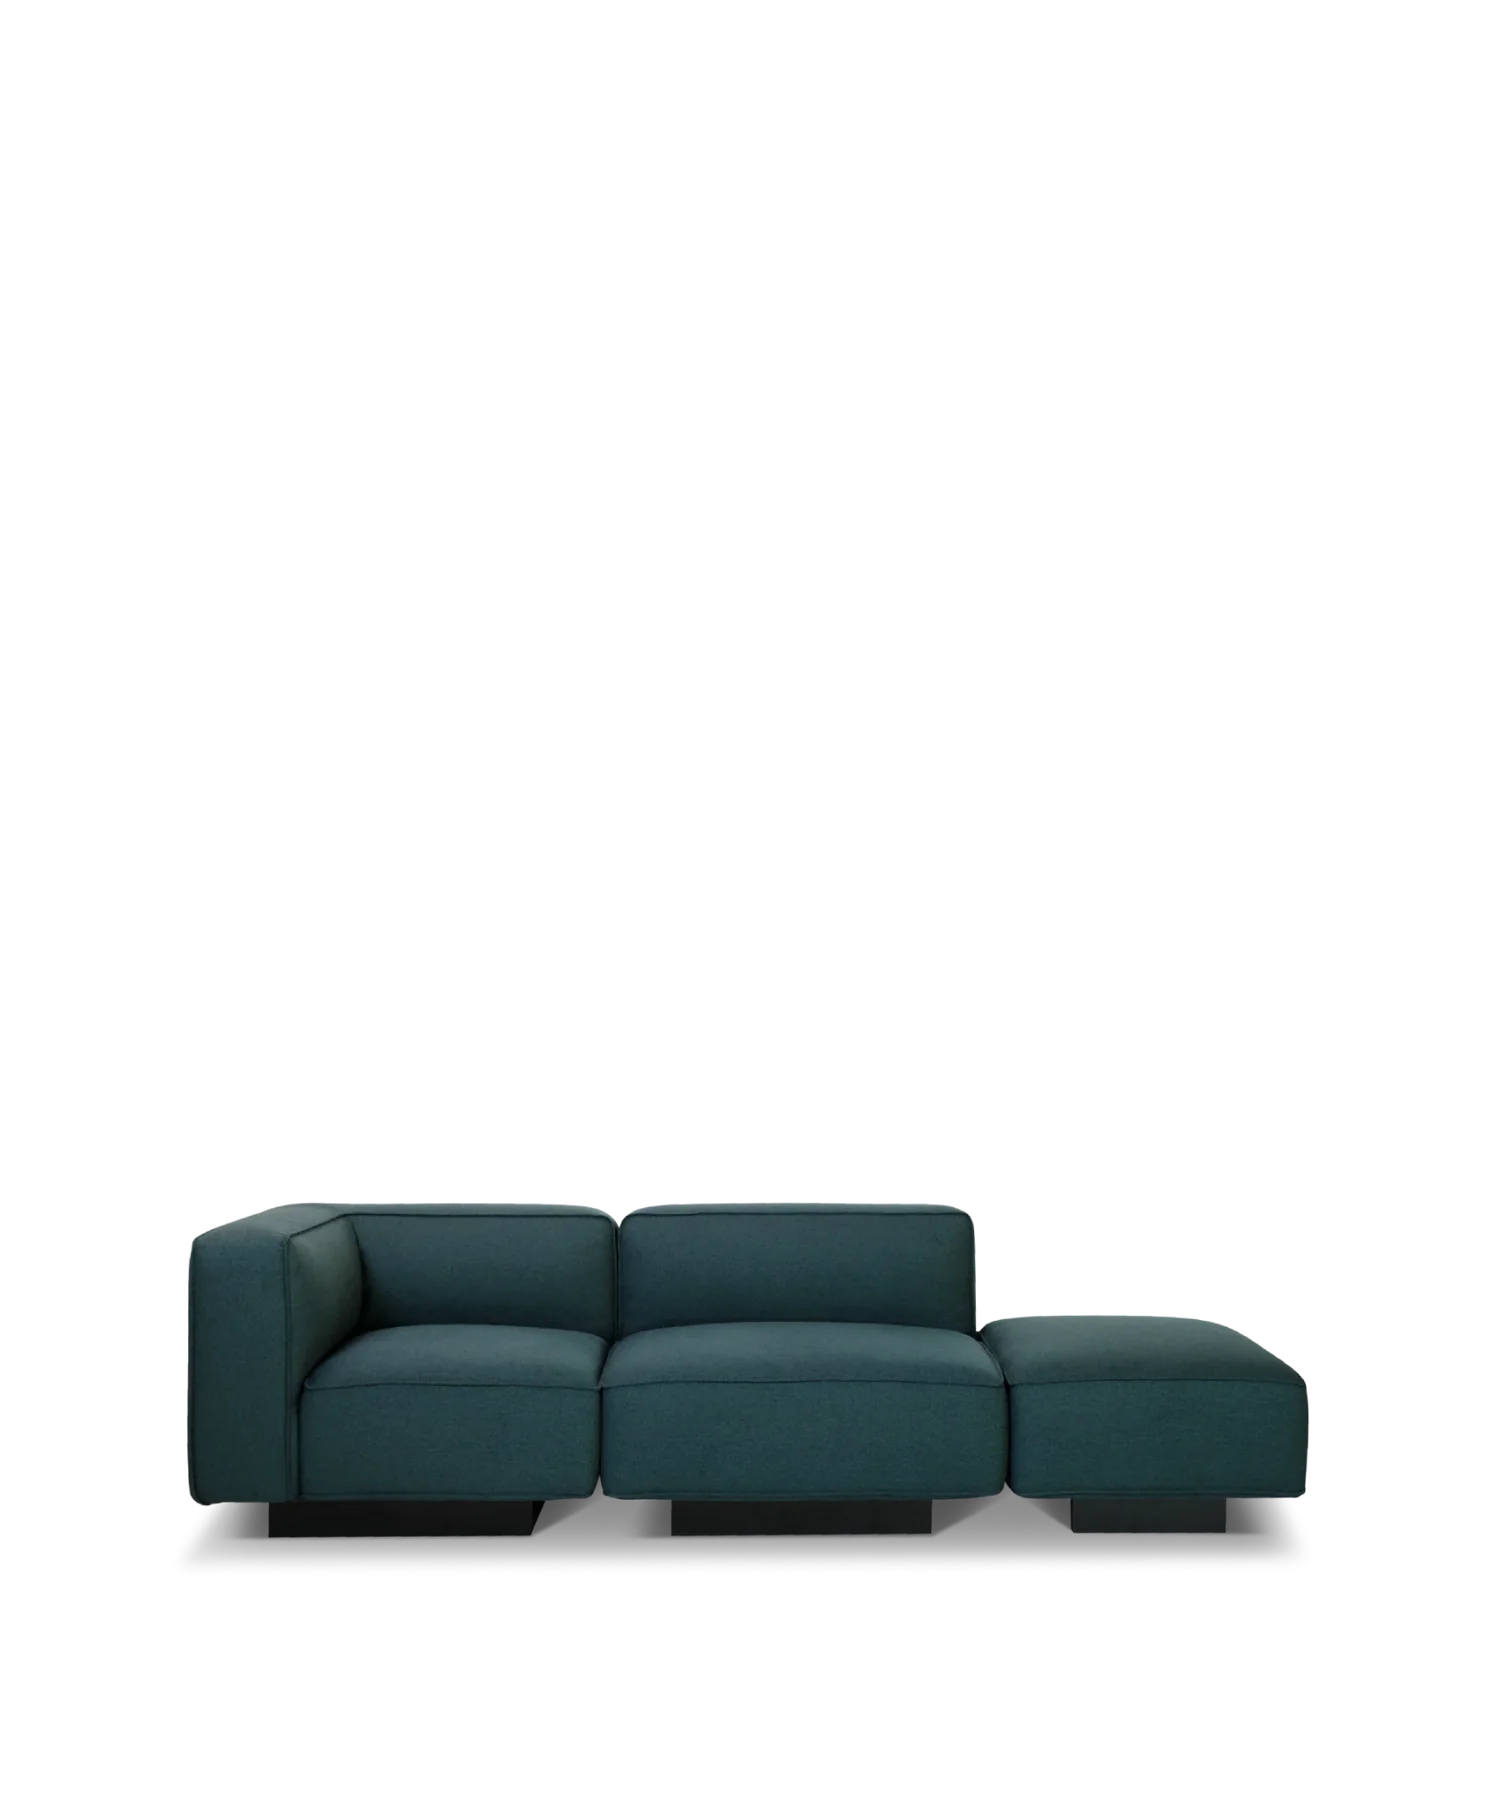 UTOPIA SOFA - OPEN END FOR 3 PEOPLE